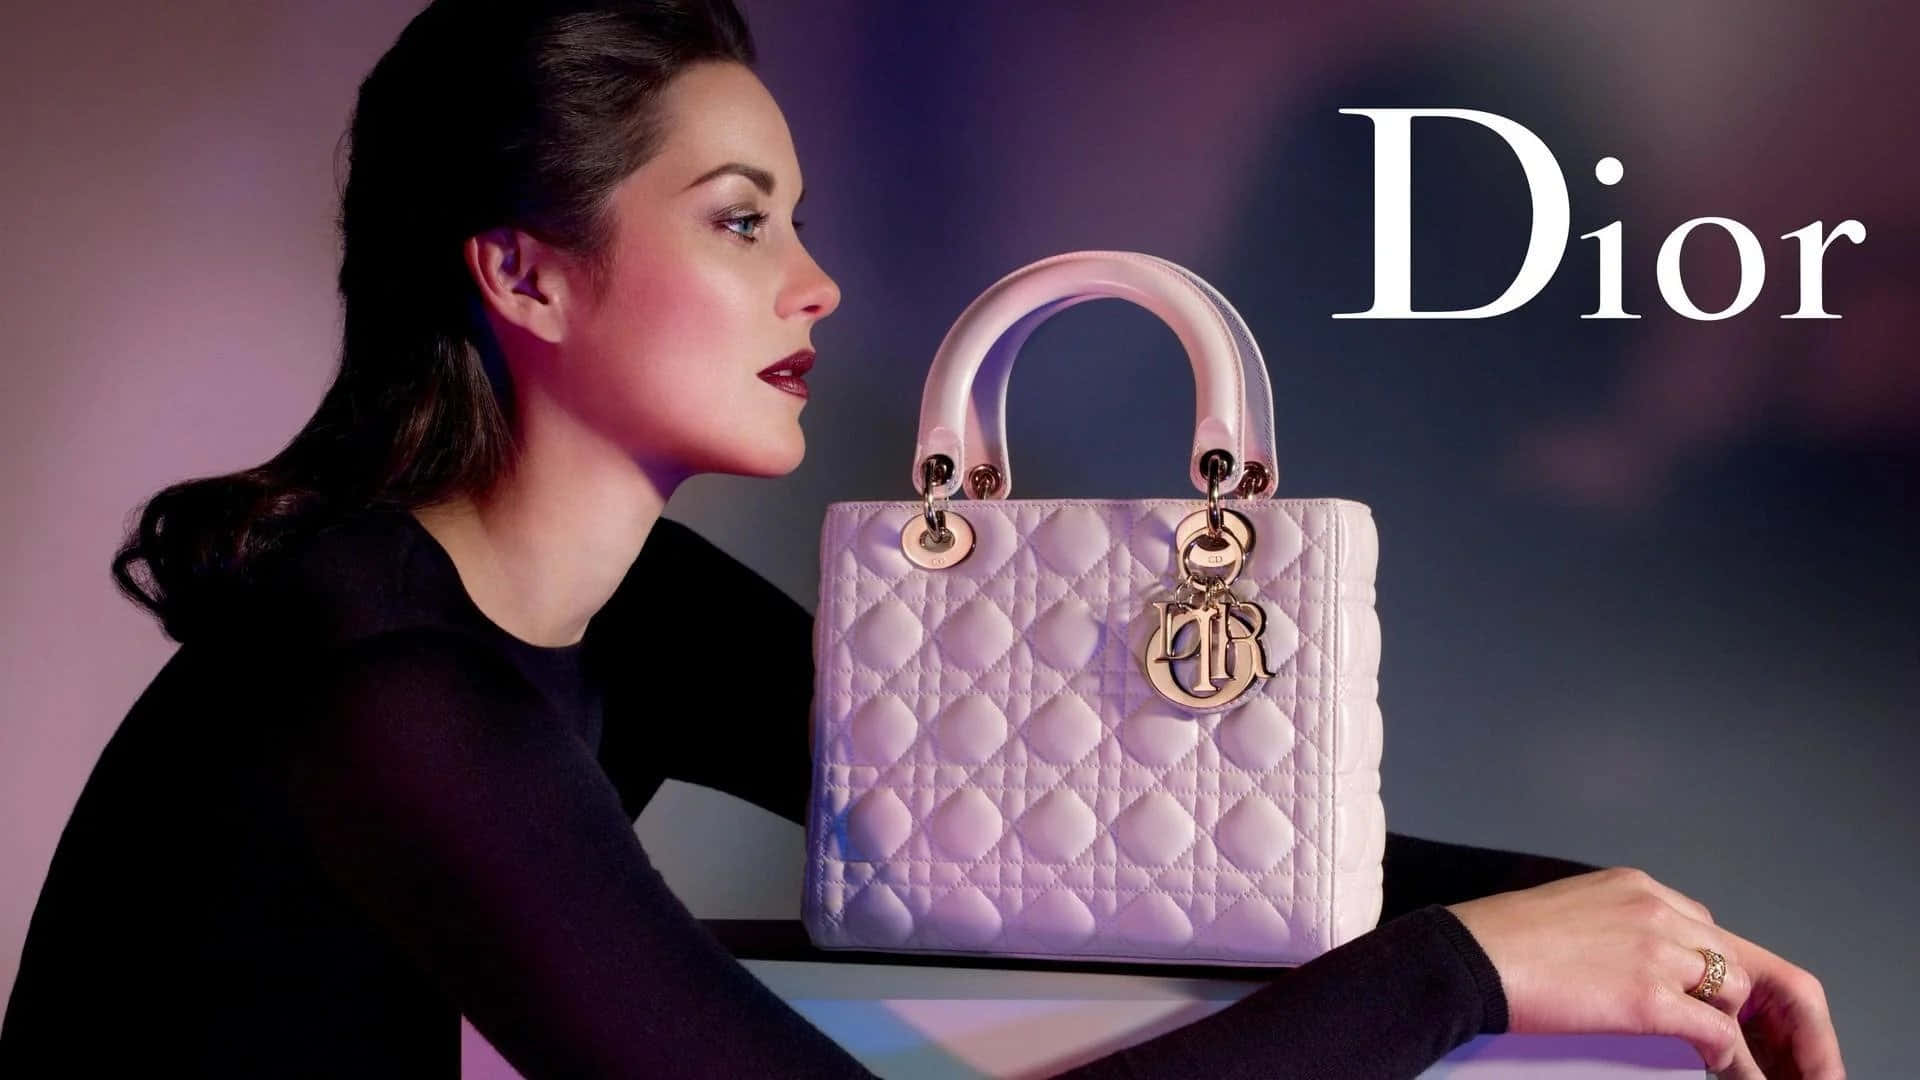 Experience Elegance and Sophistication with Dior Fragrances